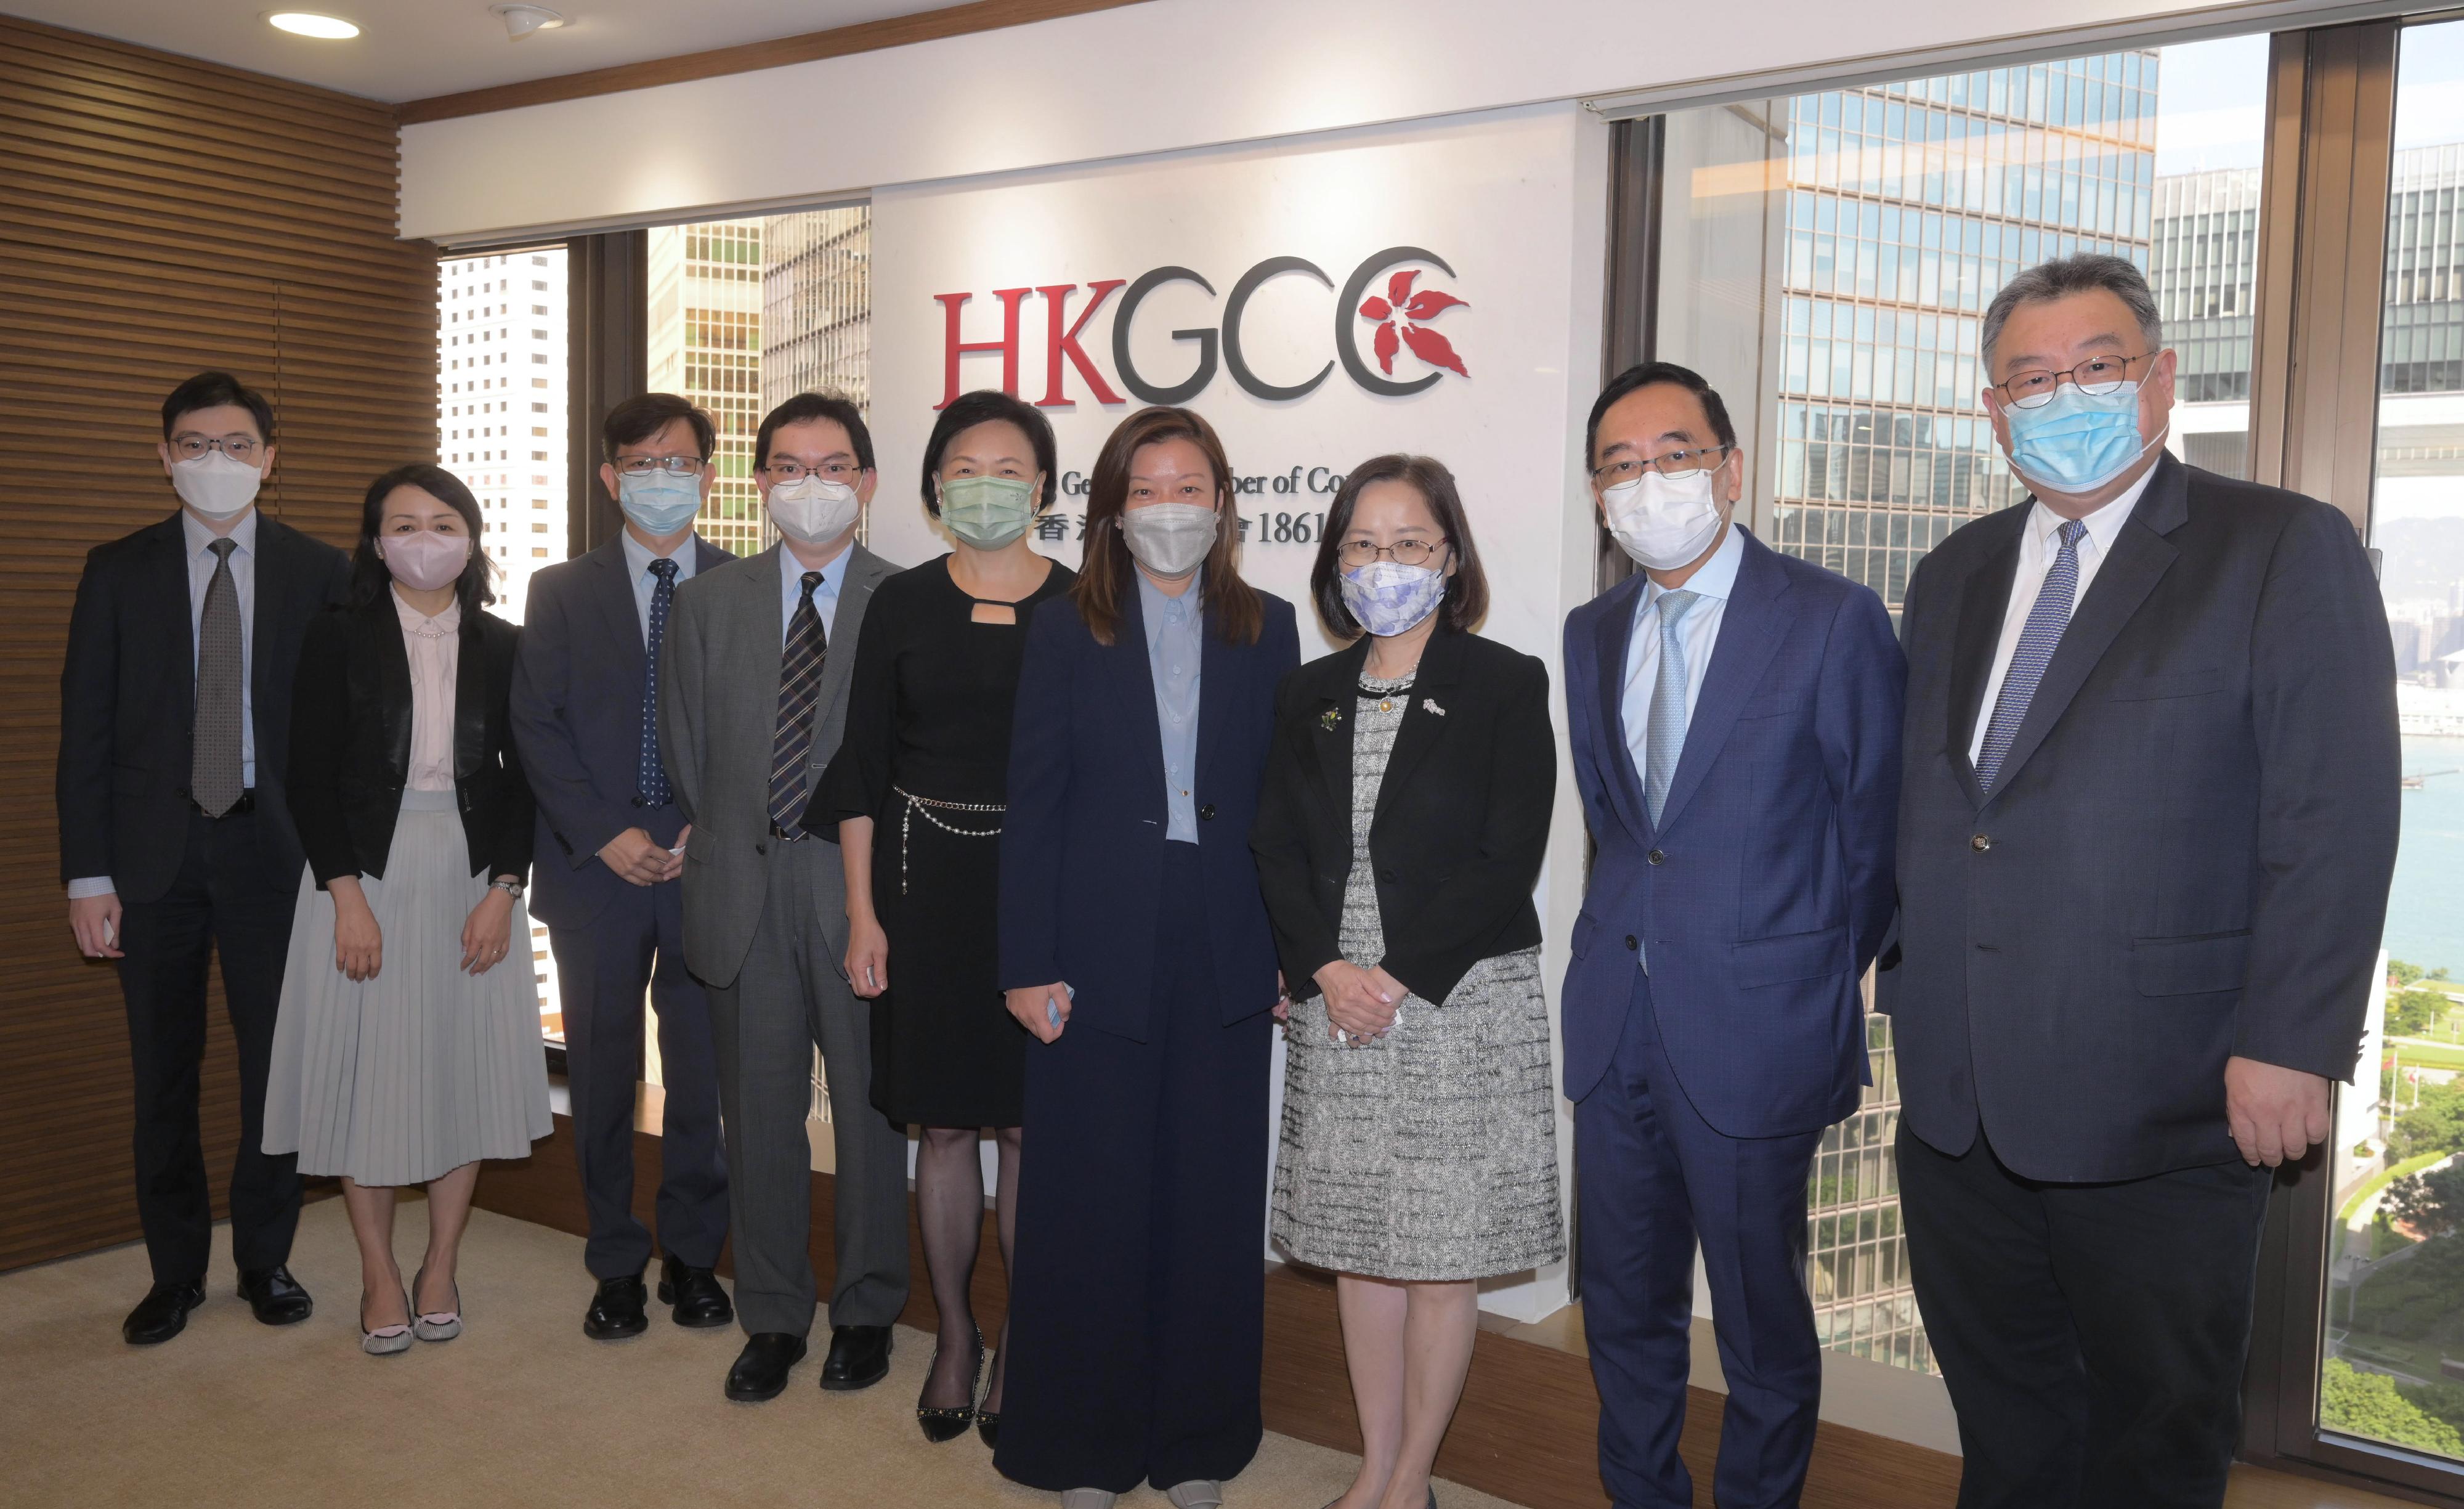 The Commissioner for Labour, Ms May Chan, has visited a number of labour organisations and employer associations in the past month to strengthen communication and engagement with employees and employers. Picture shows Ms Chan (fourth right) visiting the Hong Kong General Chamber of Commerce.